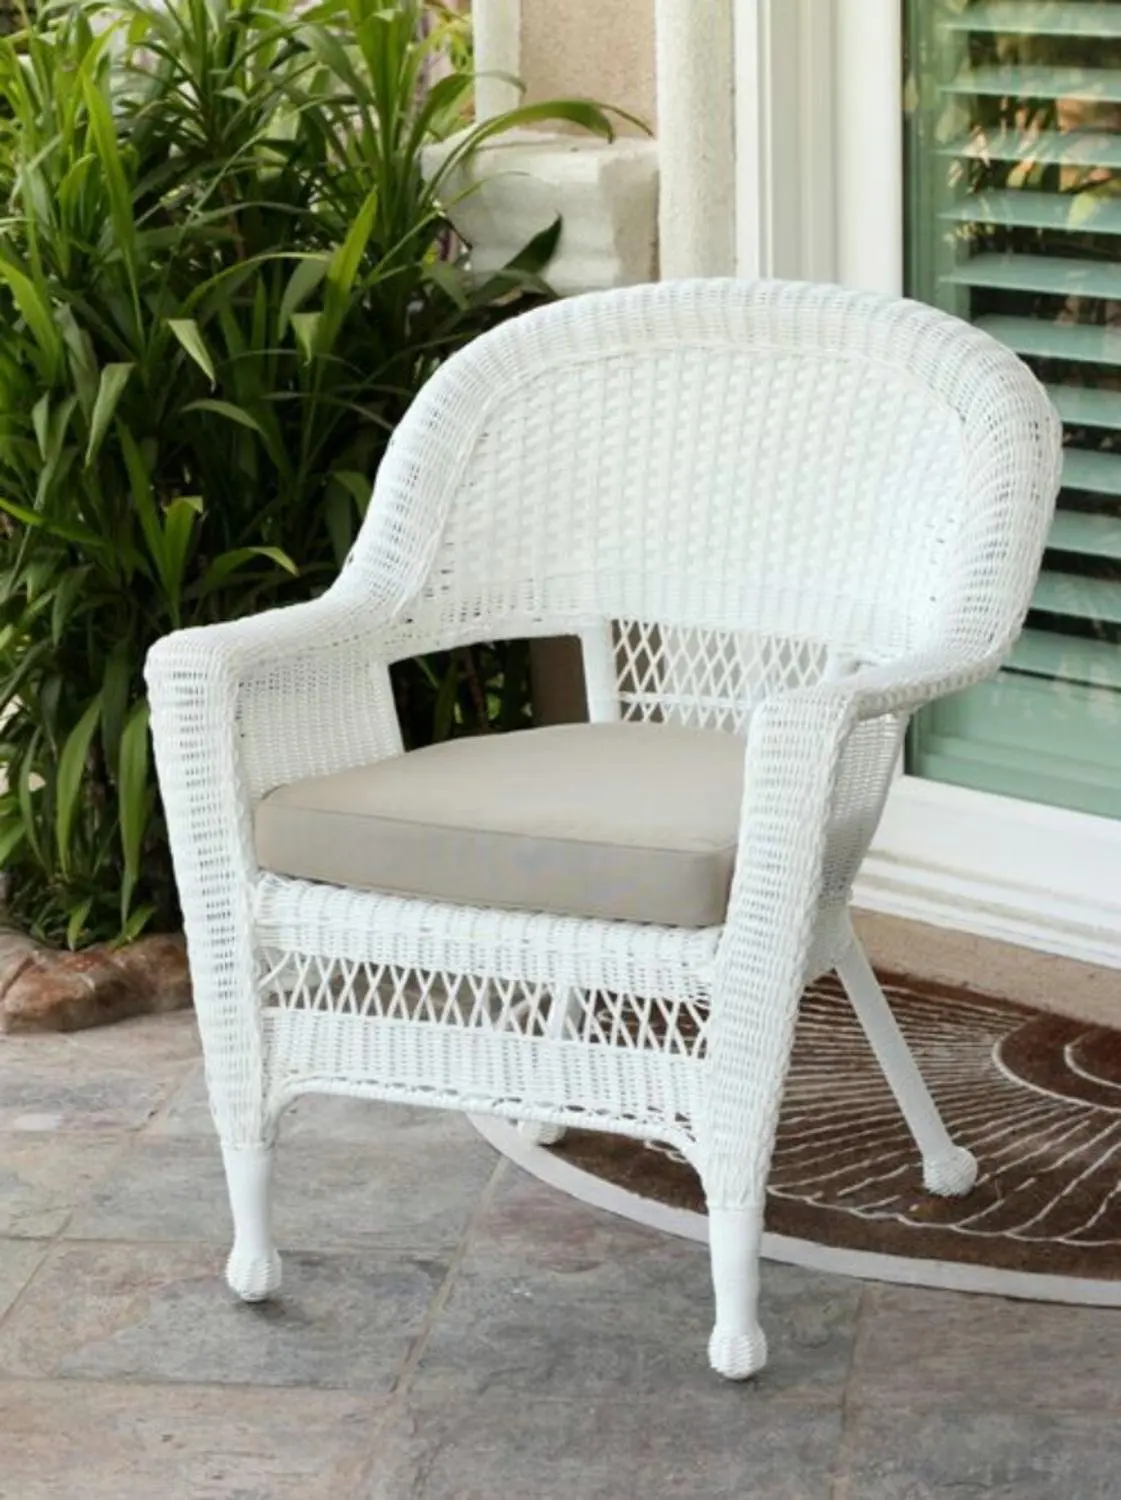 Cheap White Resin Wicker Chair, find White Resin Wicker Chair deals on